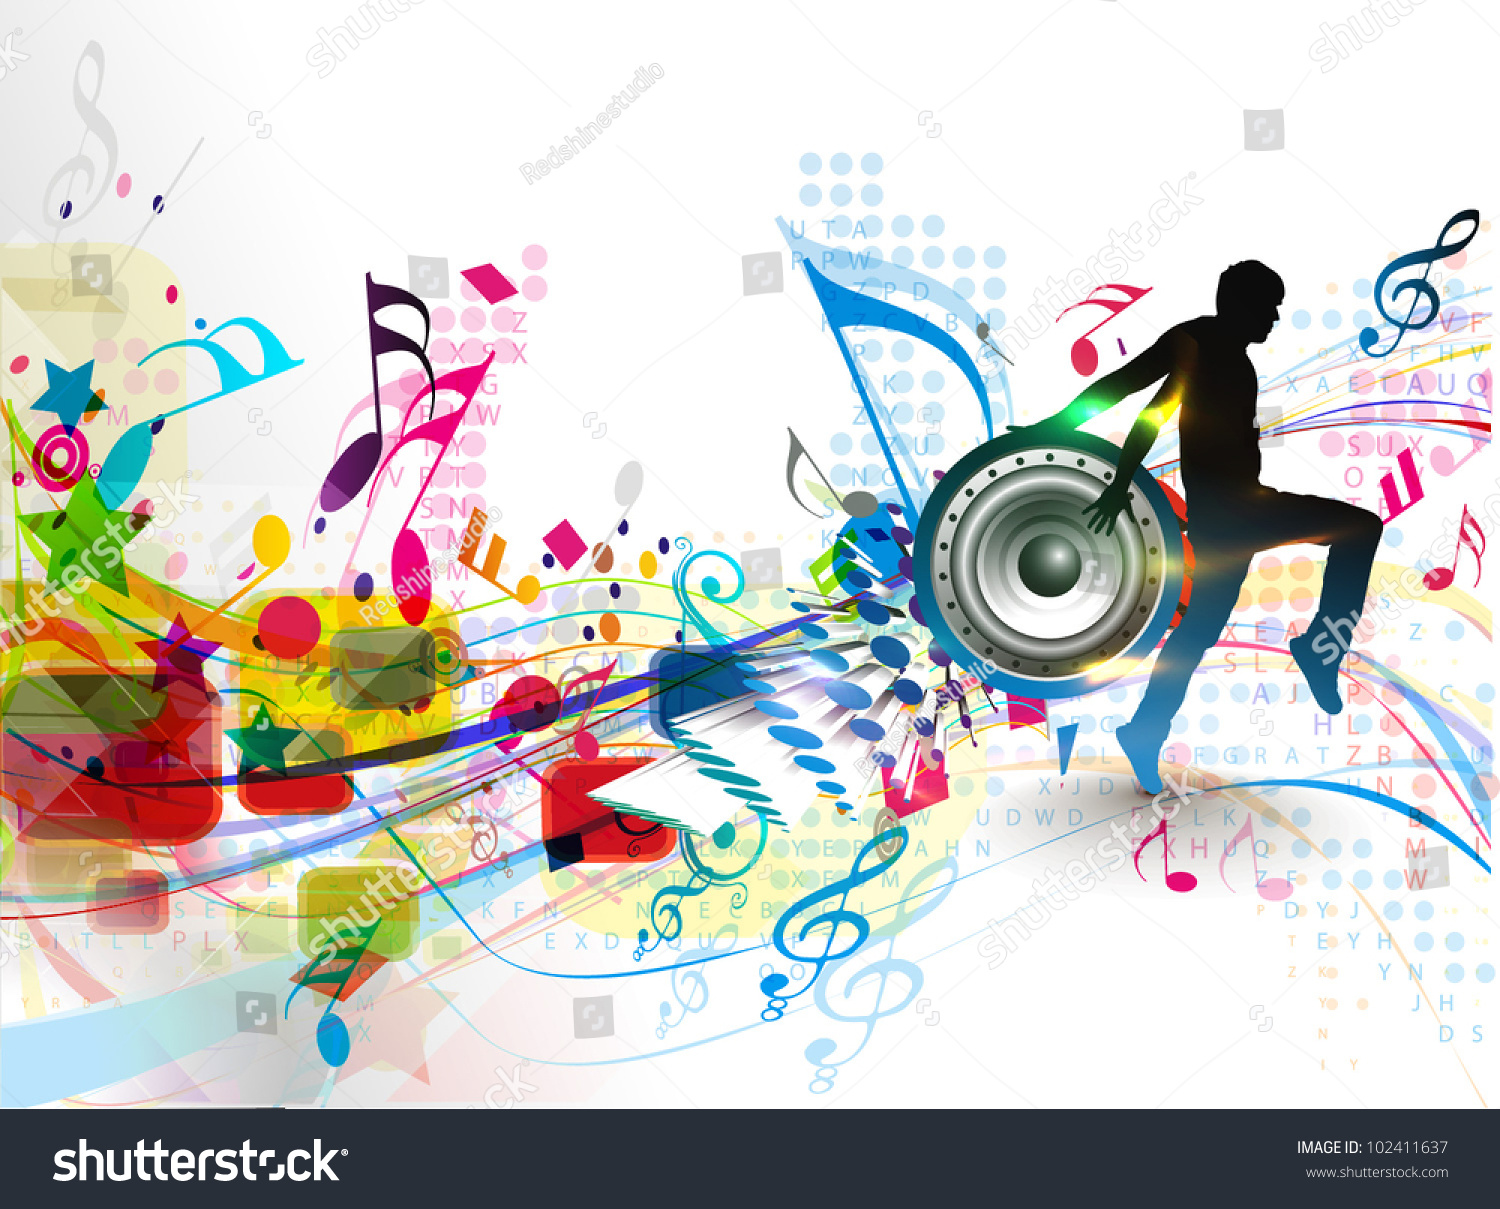 music event clipart - photo #15